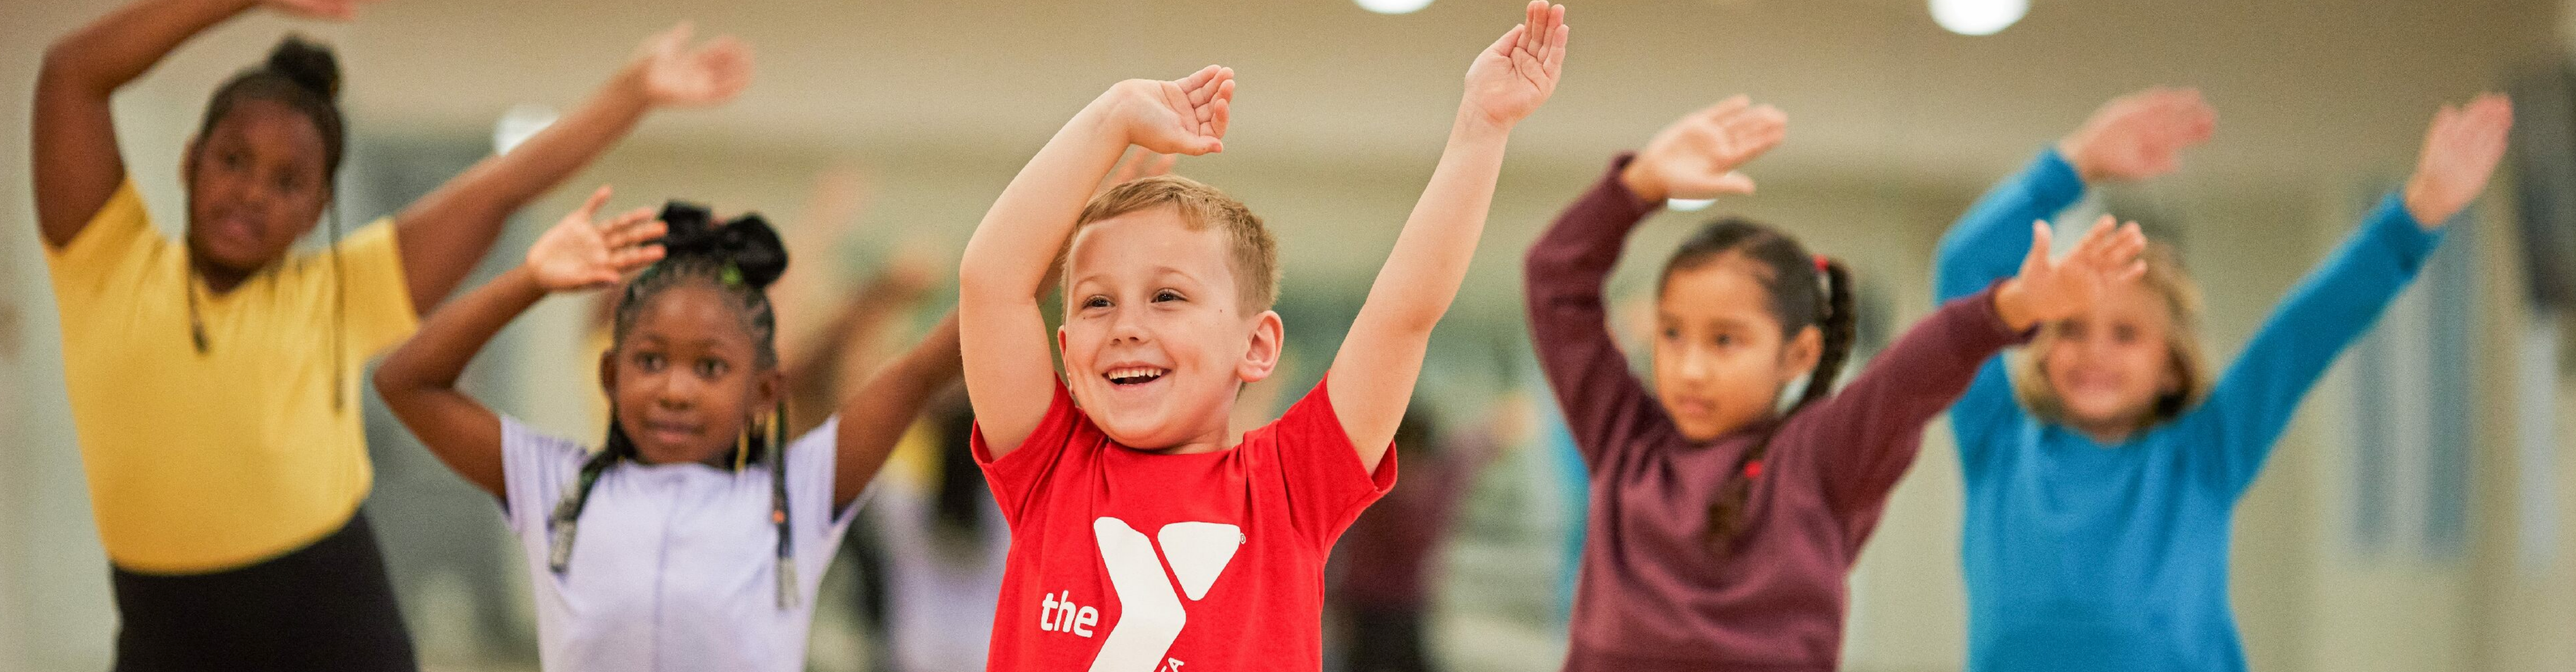 Children waving arms and exercising at the Regional YMCA of Western CT